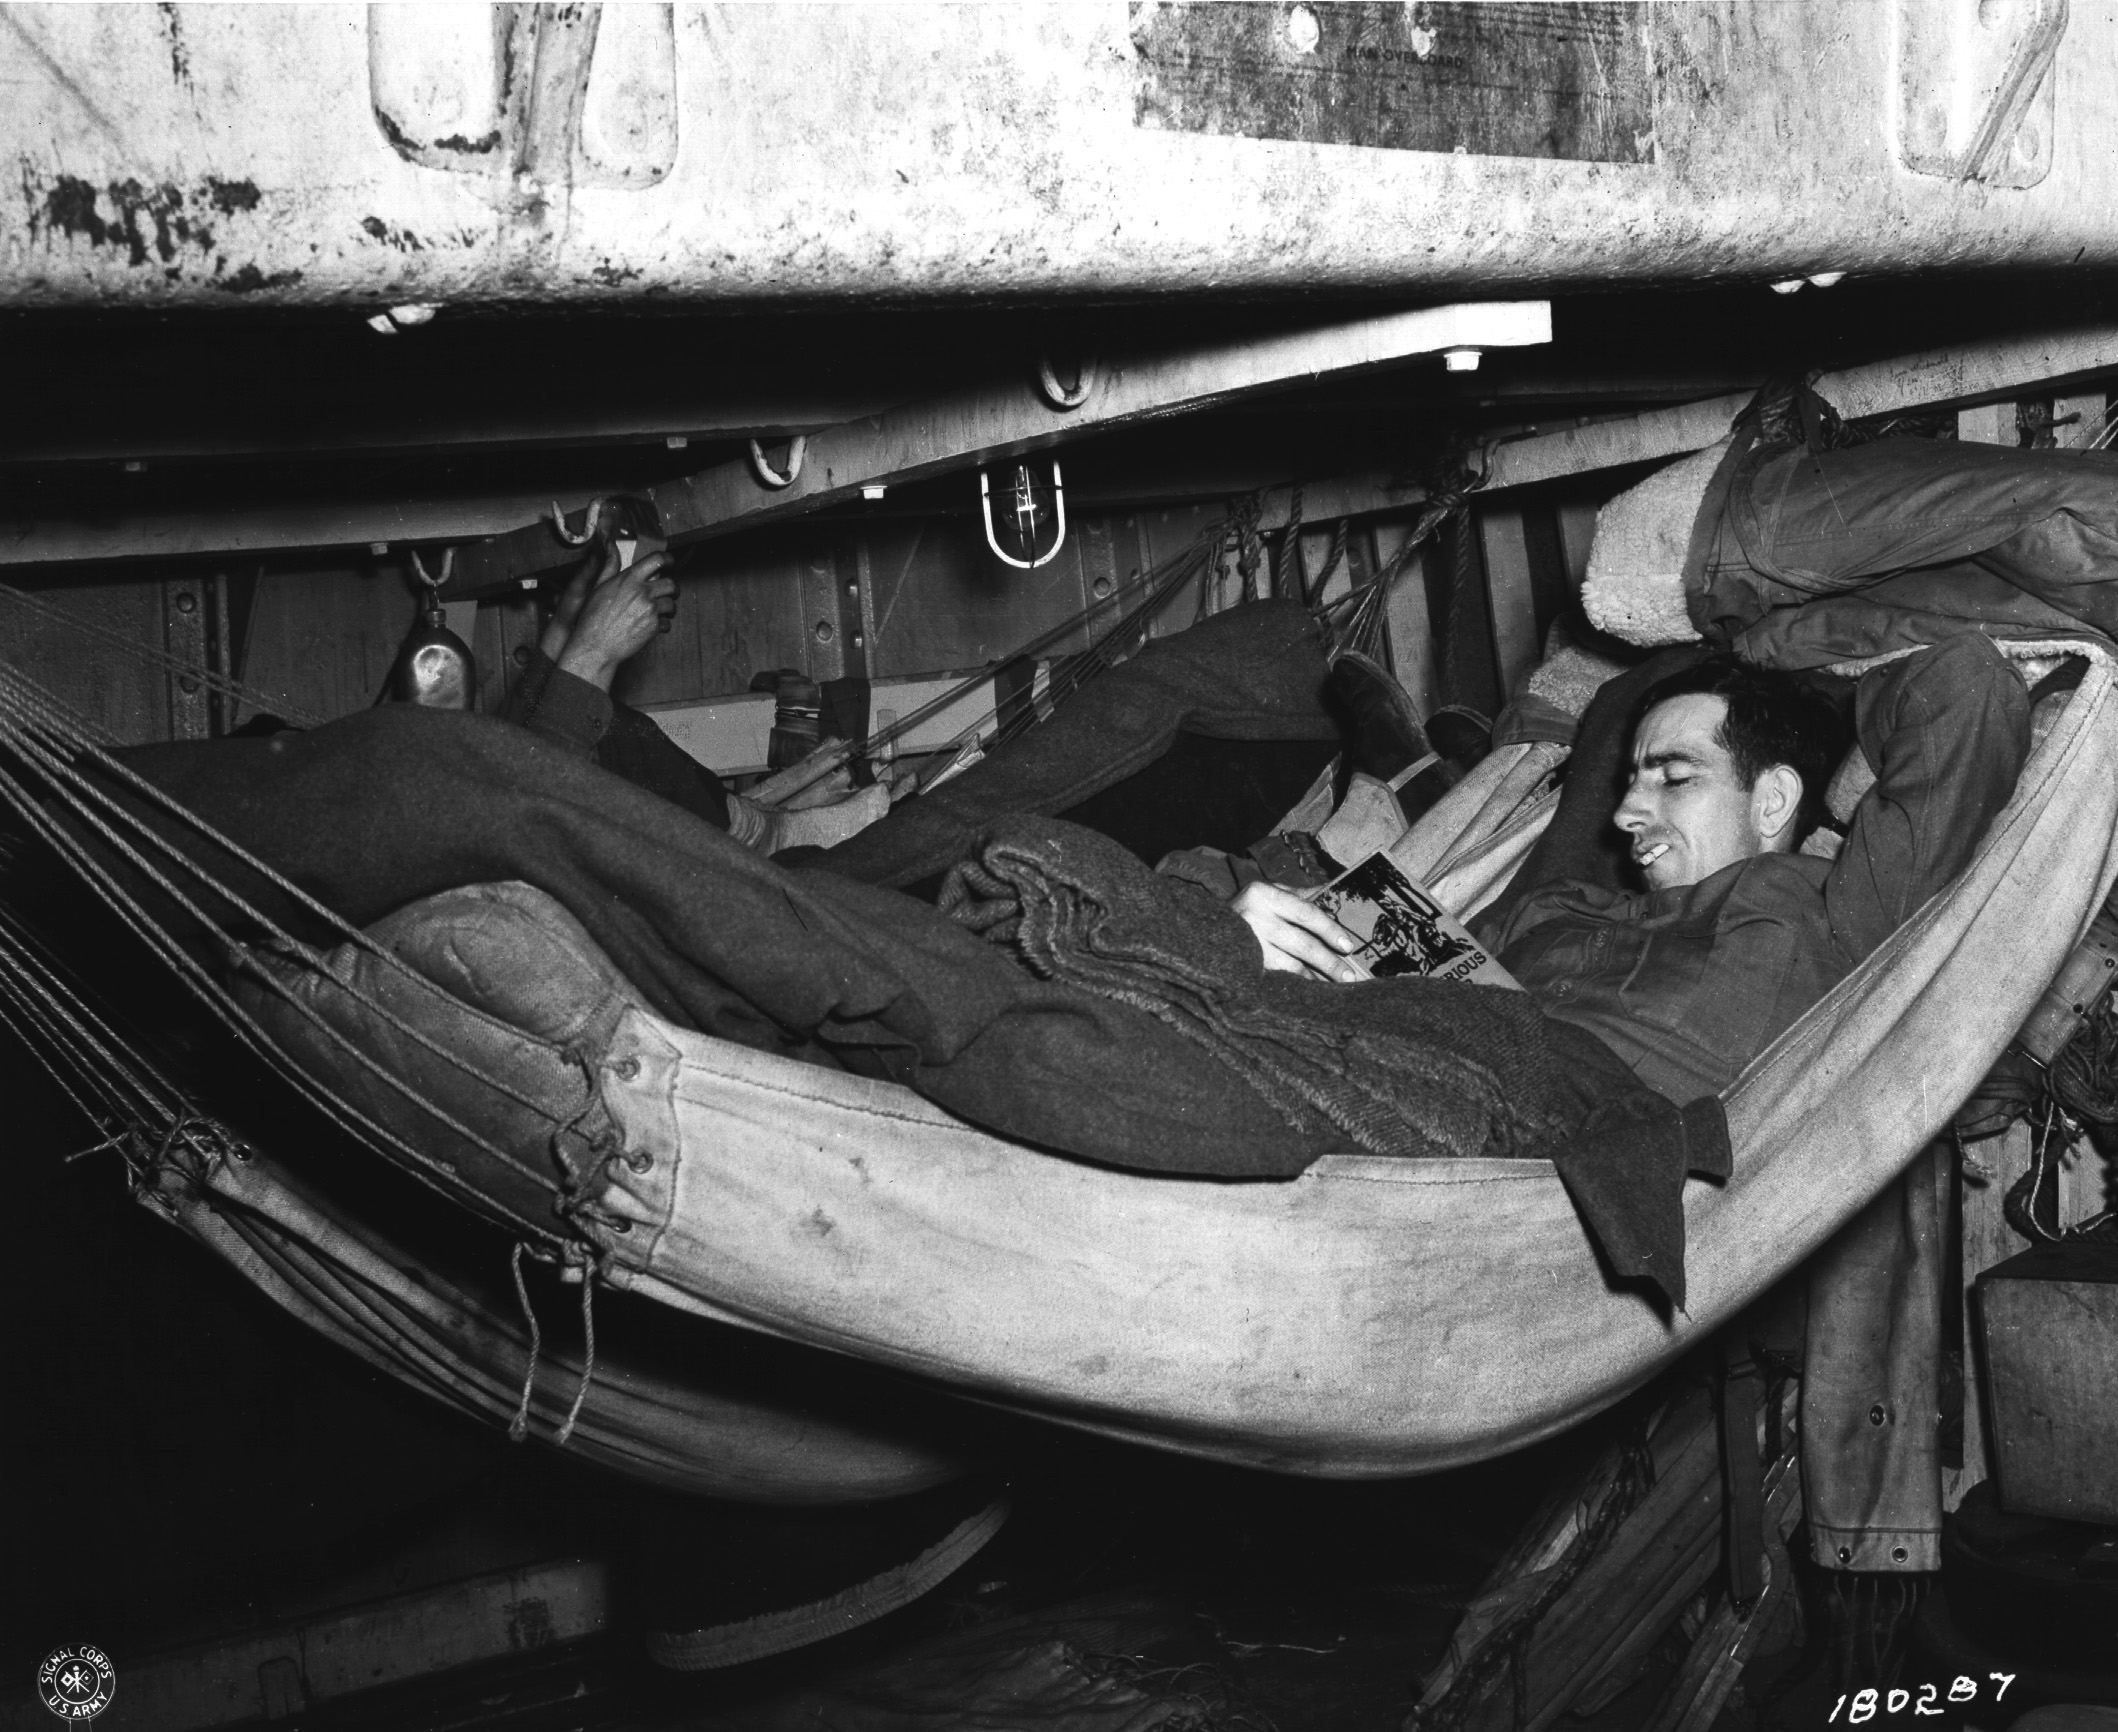 US Army soldier relaxing with a book while aboard a transport, off Iceland, 20 May 1943